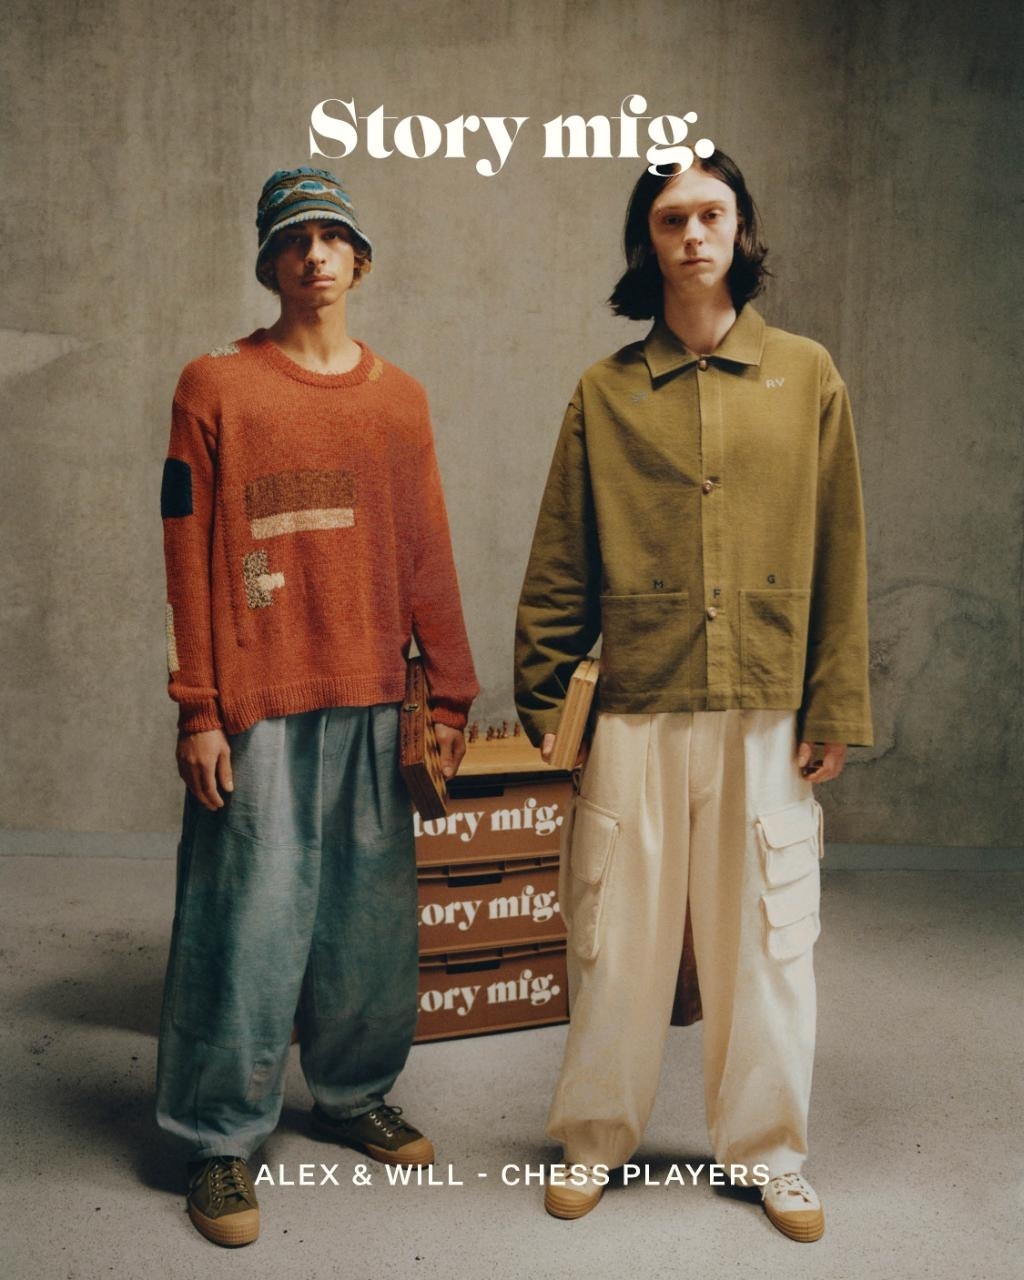 Two models, Alex and Will, posed in casual sweaters and slacks, with a text overlay &quot;Story mfg.&quot;